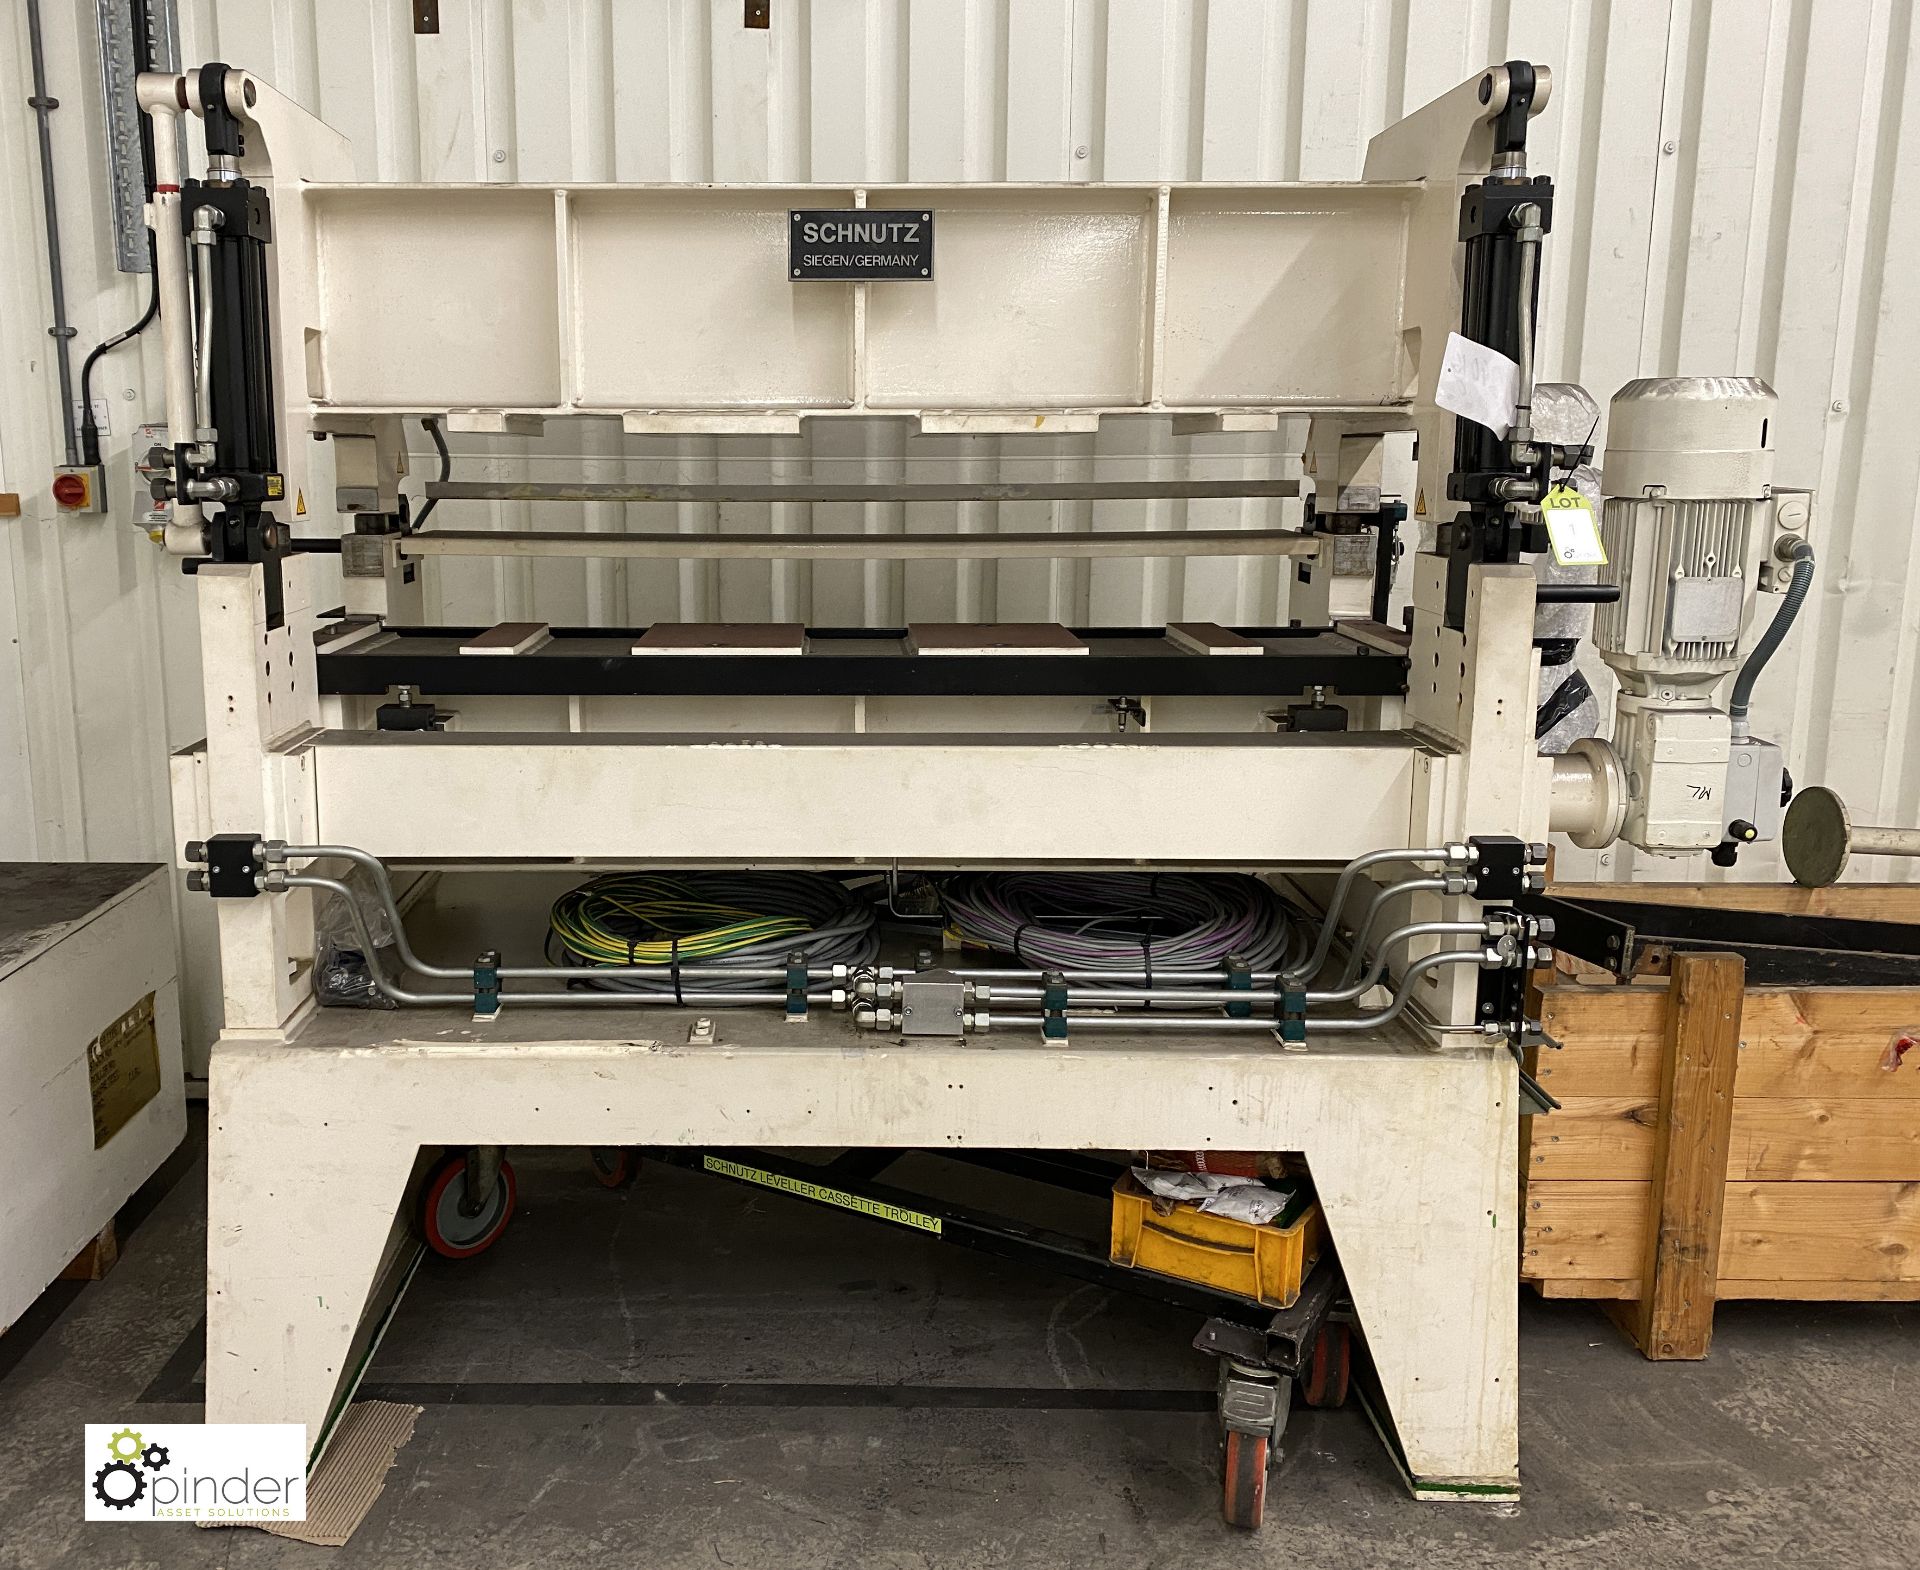 Schnutz RME 6/40/11-1500 O.A. Plate Levelling Machine, serial number A010-181.01, year 2012, 1500m - Image 4 of 20